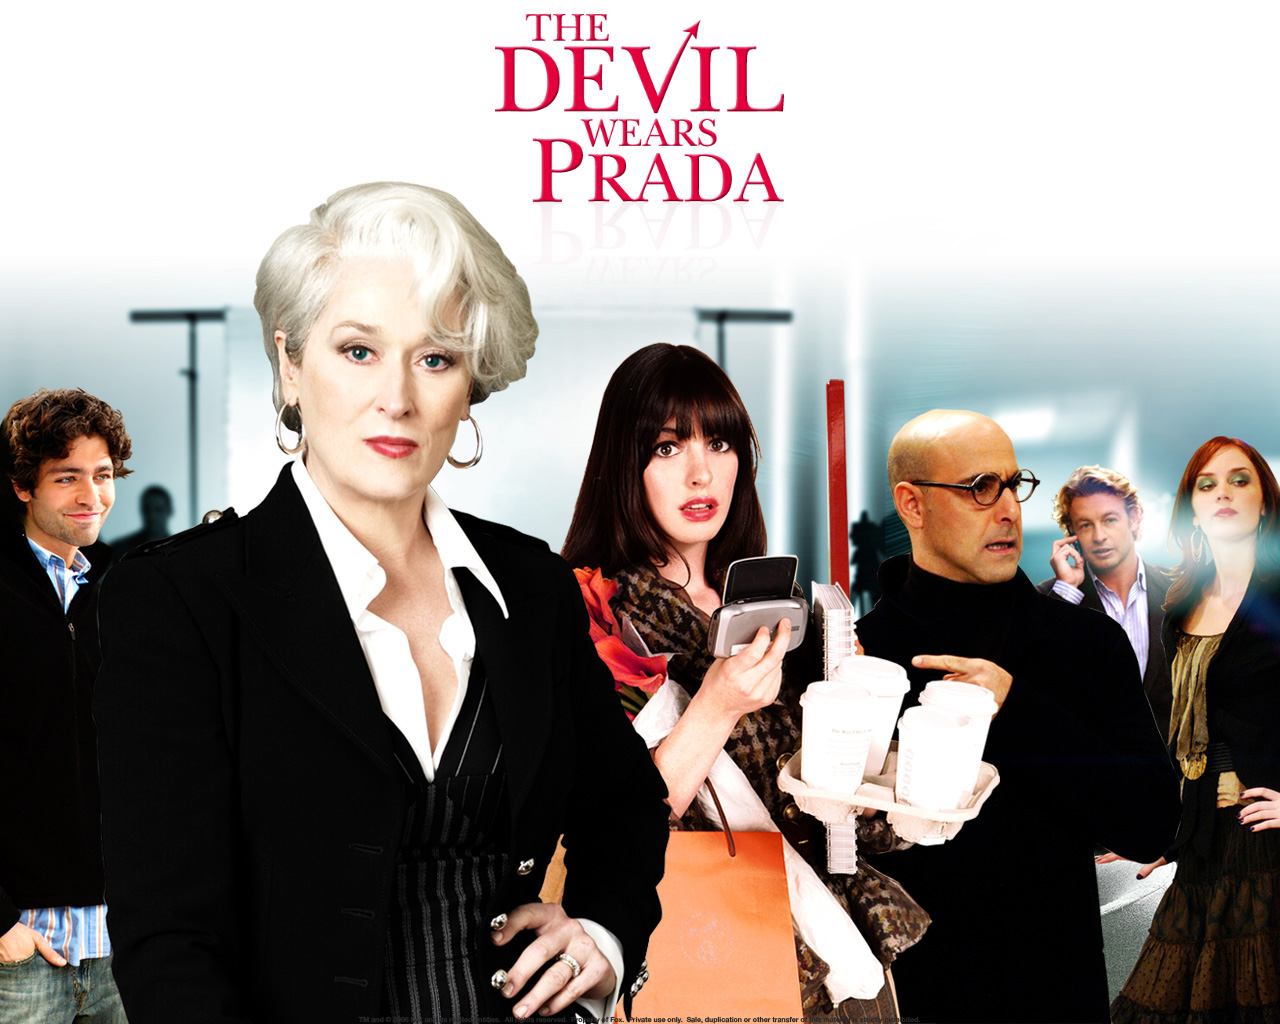 Amazing The Devil Wears Prada Pictures & Backgrounds